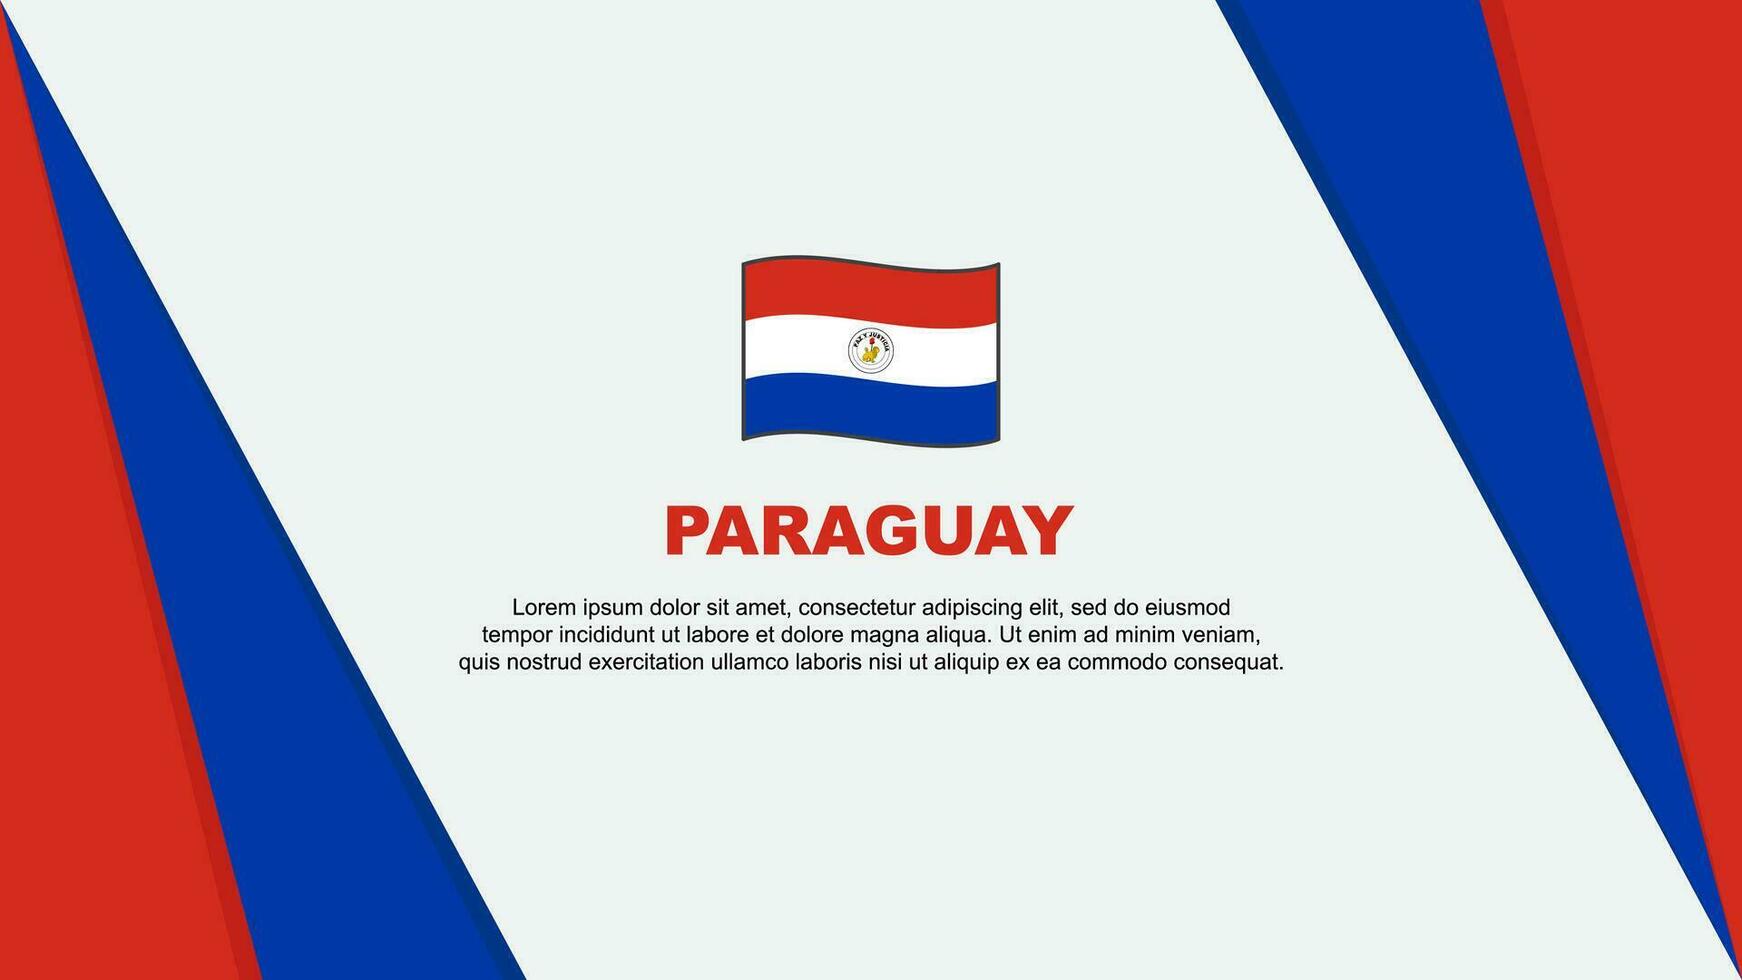 Paraguay Flag Abstract Background Design Template. Paraguay Independence Day Banner Cartoon Vector Illustration. Flag